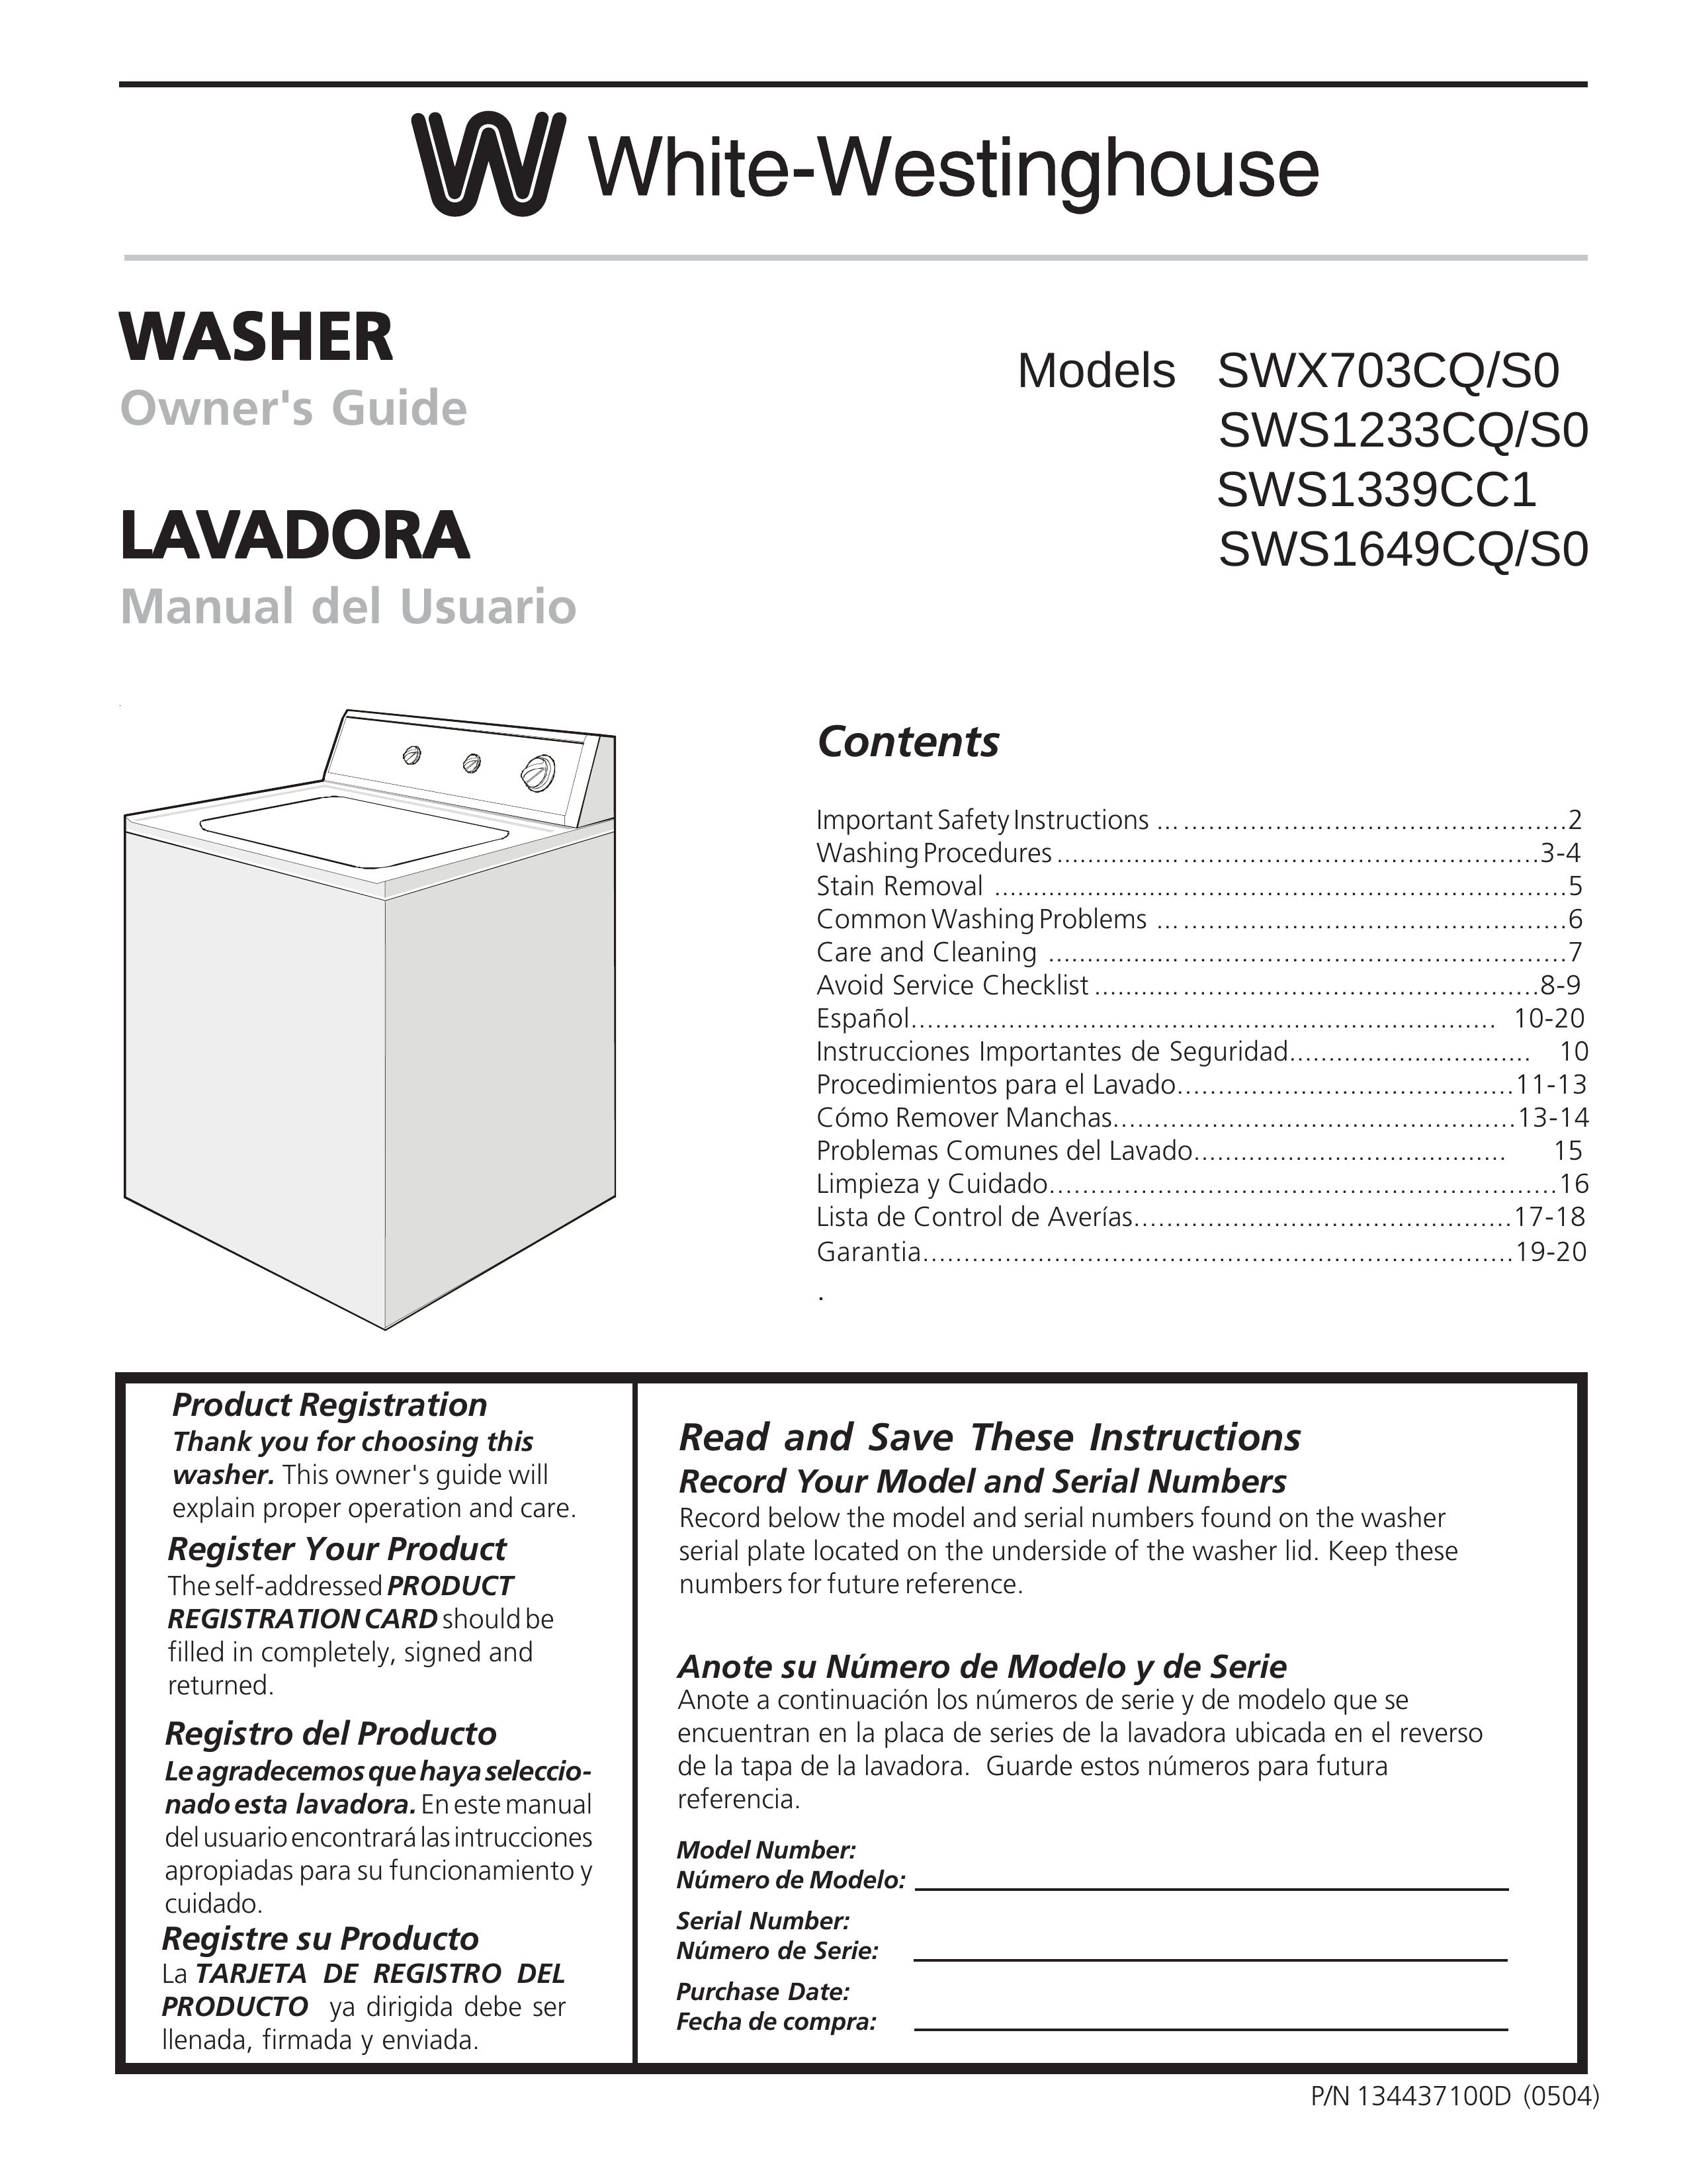 White-Westinghouse SWS1233CQ/S0 Washer User Manual